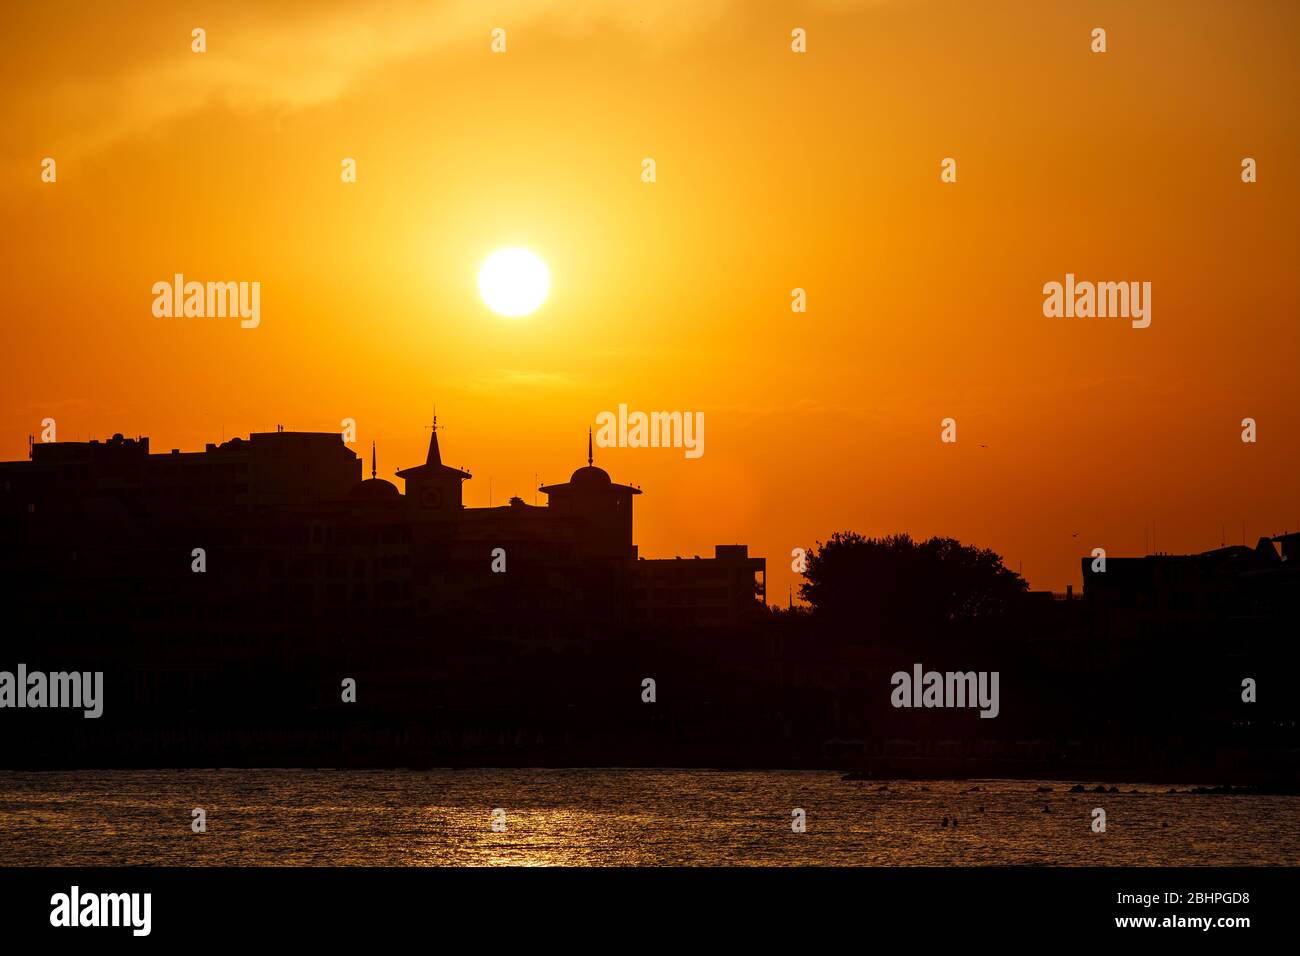 Golden sunset on the beach. Silhouette of the city. Beautiful architecort by the sea on the background of the sunset. Stock Photo